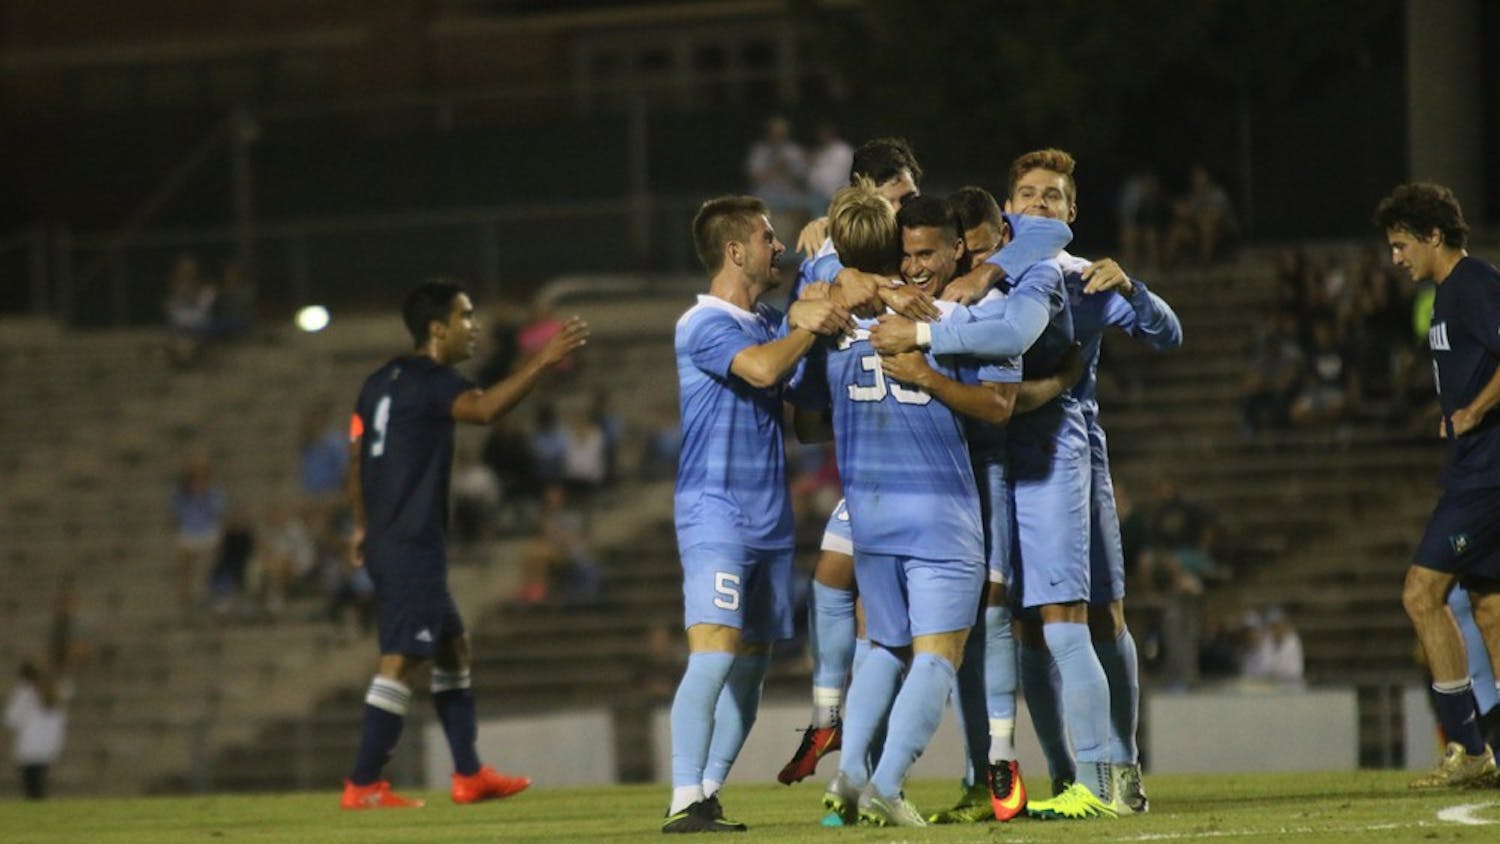 The men's soccer team celebrates after midfielder Nico Melo (31) scored the game winning goal against UNCW on Tuesday night. 